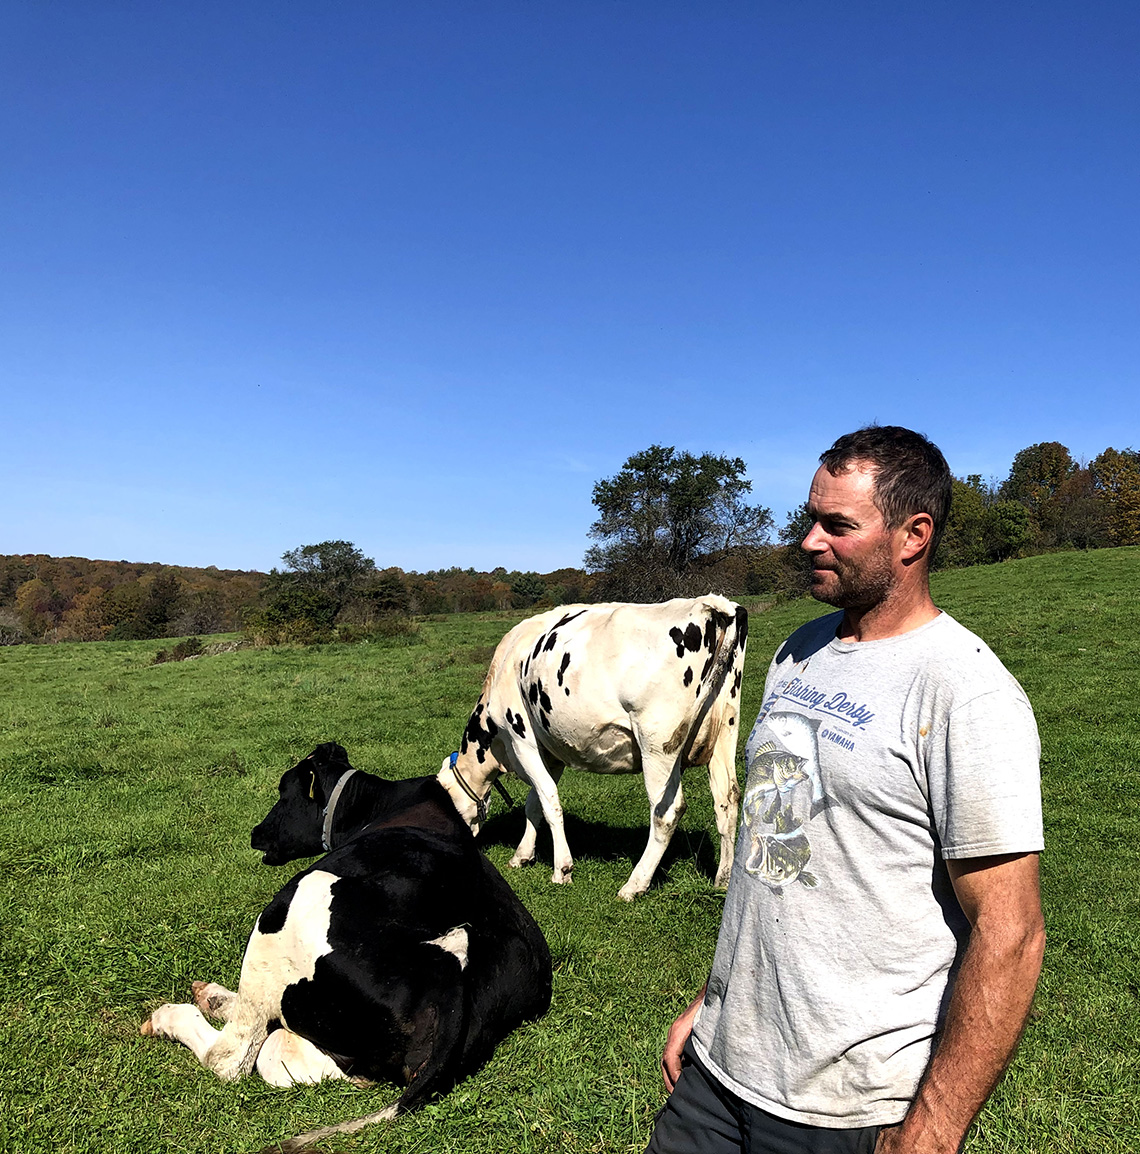 A farmer stands with two cows in the field